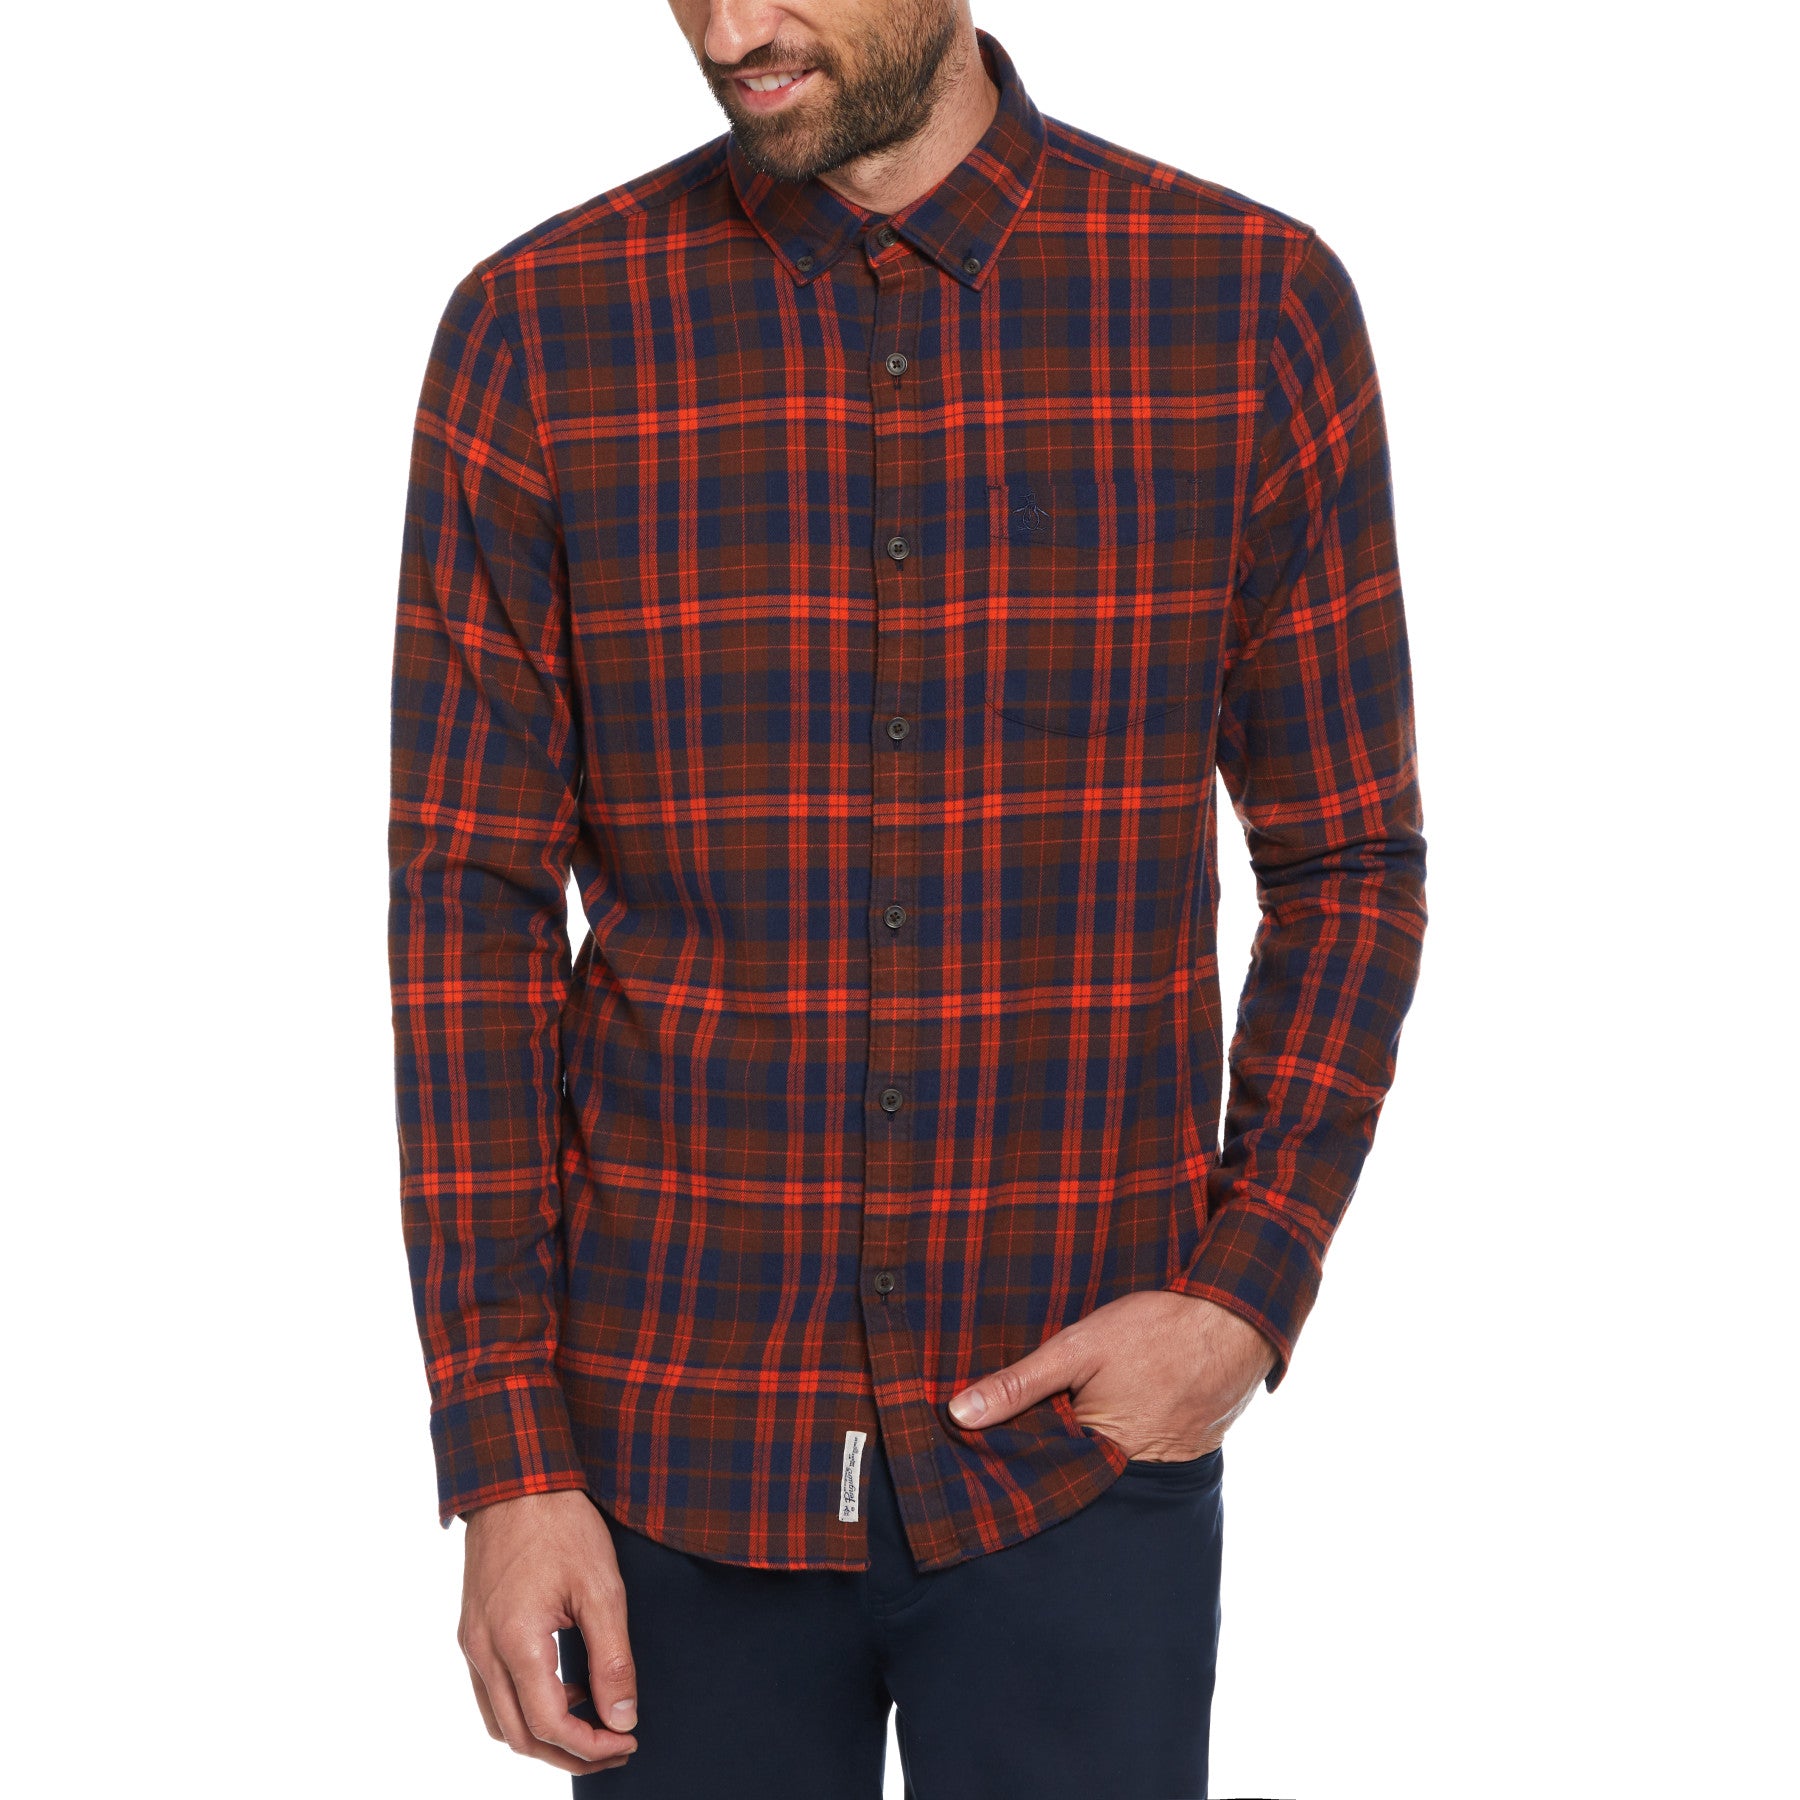 View Long Sleeve Flannel Plaid Shirt In Dress Blues information